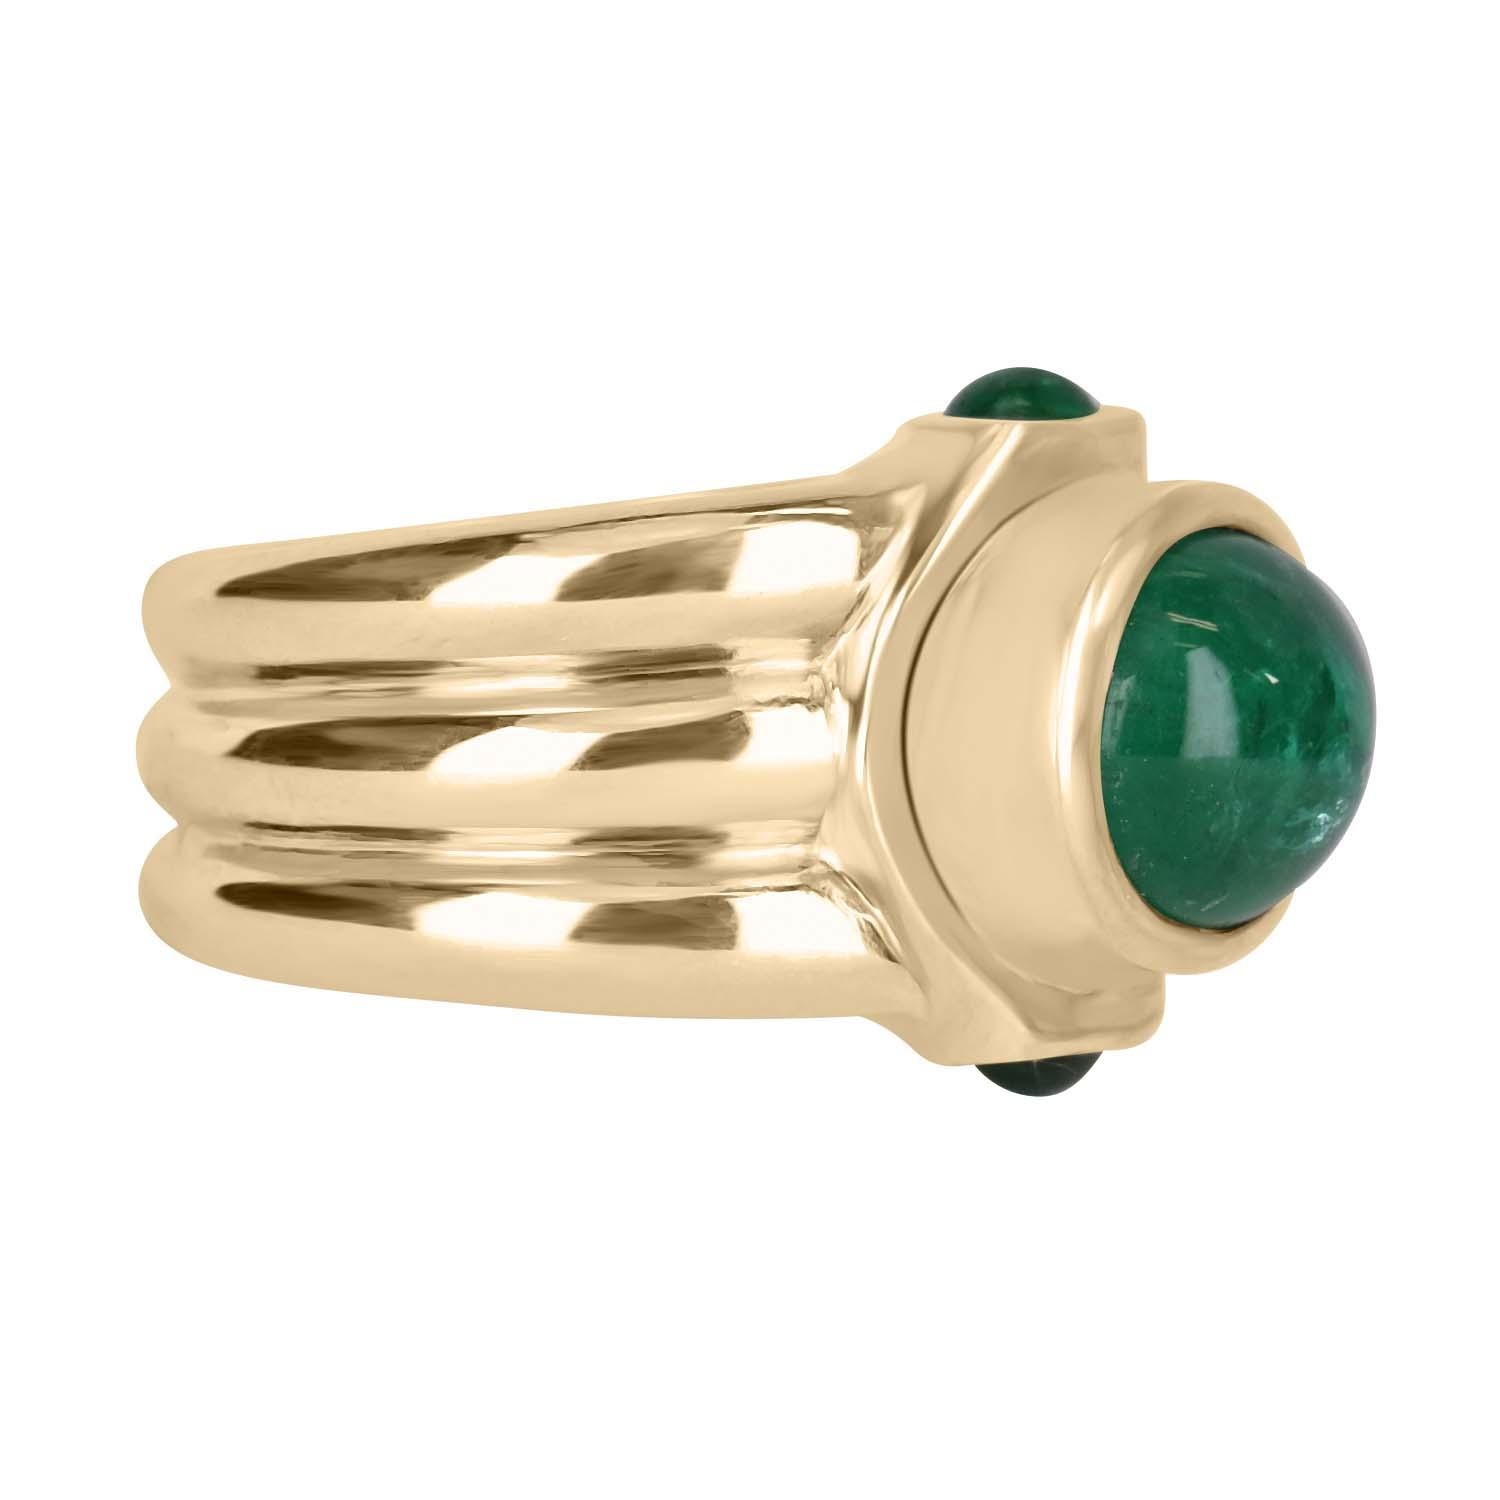 A one of a kind men's natural emerald cabochon ring. Featuring the center stone, with a full 3.42-carat cabochon with a beautiful dark green color. Accented by two smaller cabochons totaling 0.45tcw set north to south. All stones are carefully bezel